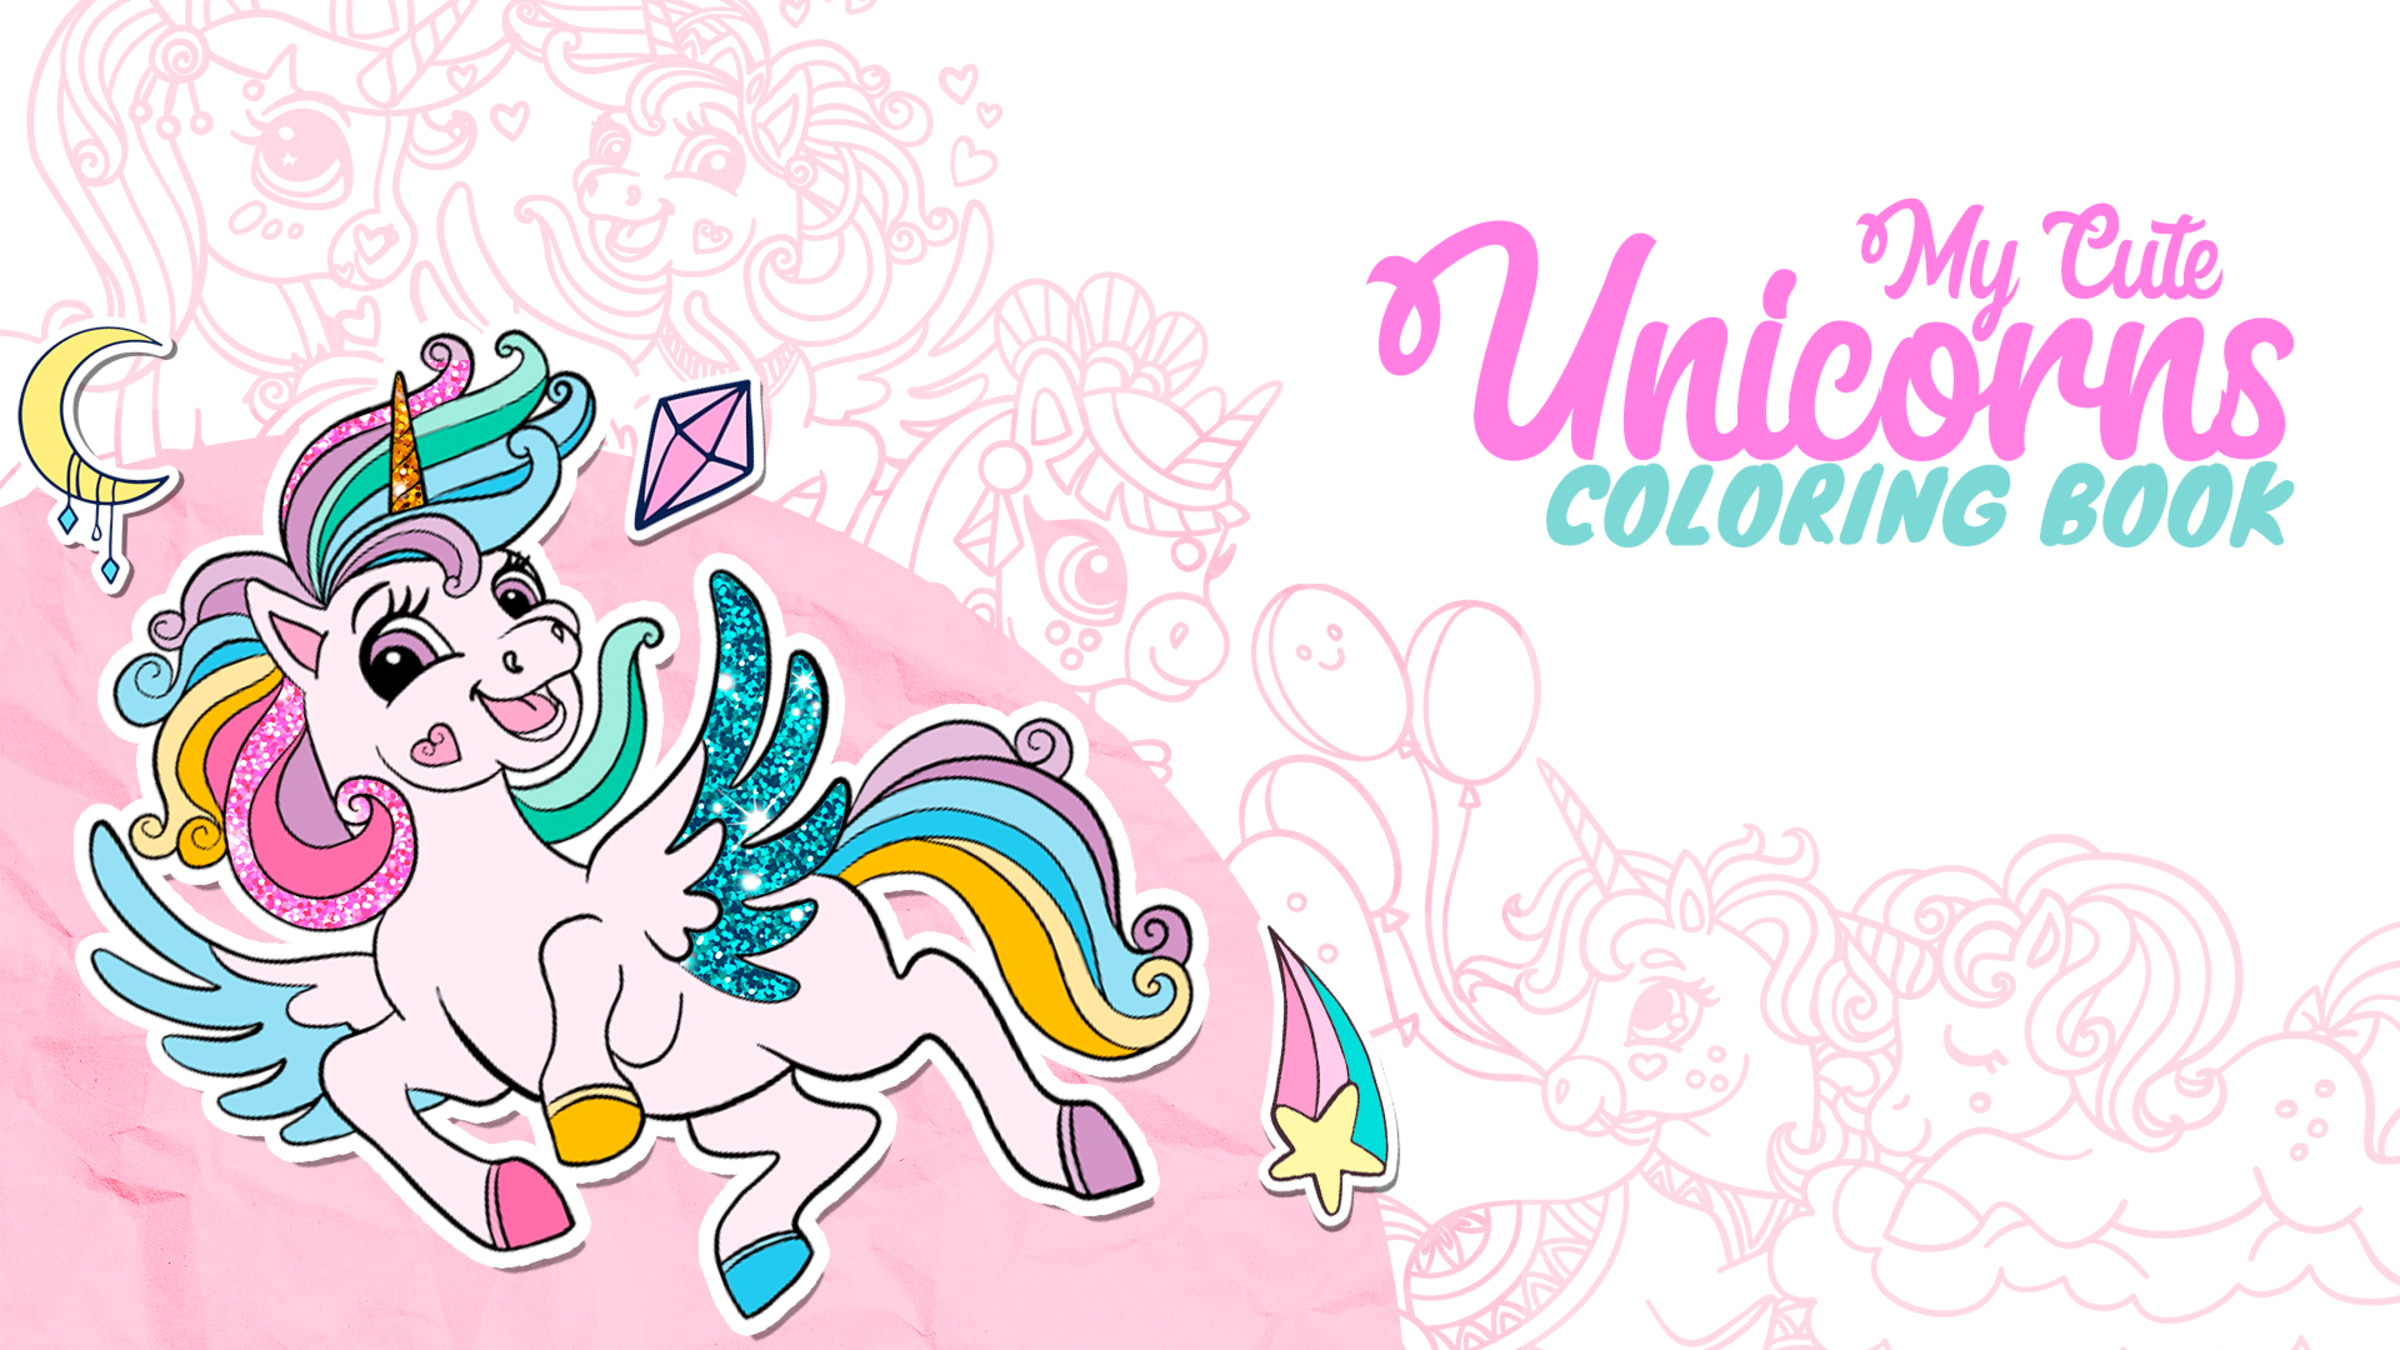 Unicorn Coloring Pages (100% Free Unicorn Coloring Sheets)